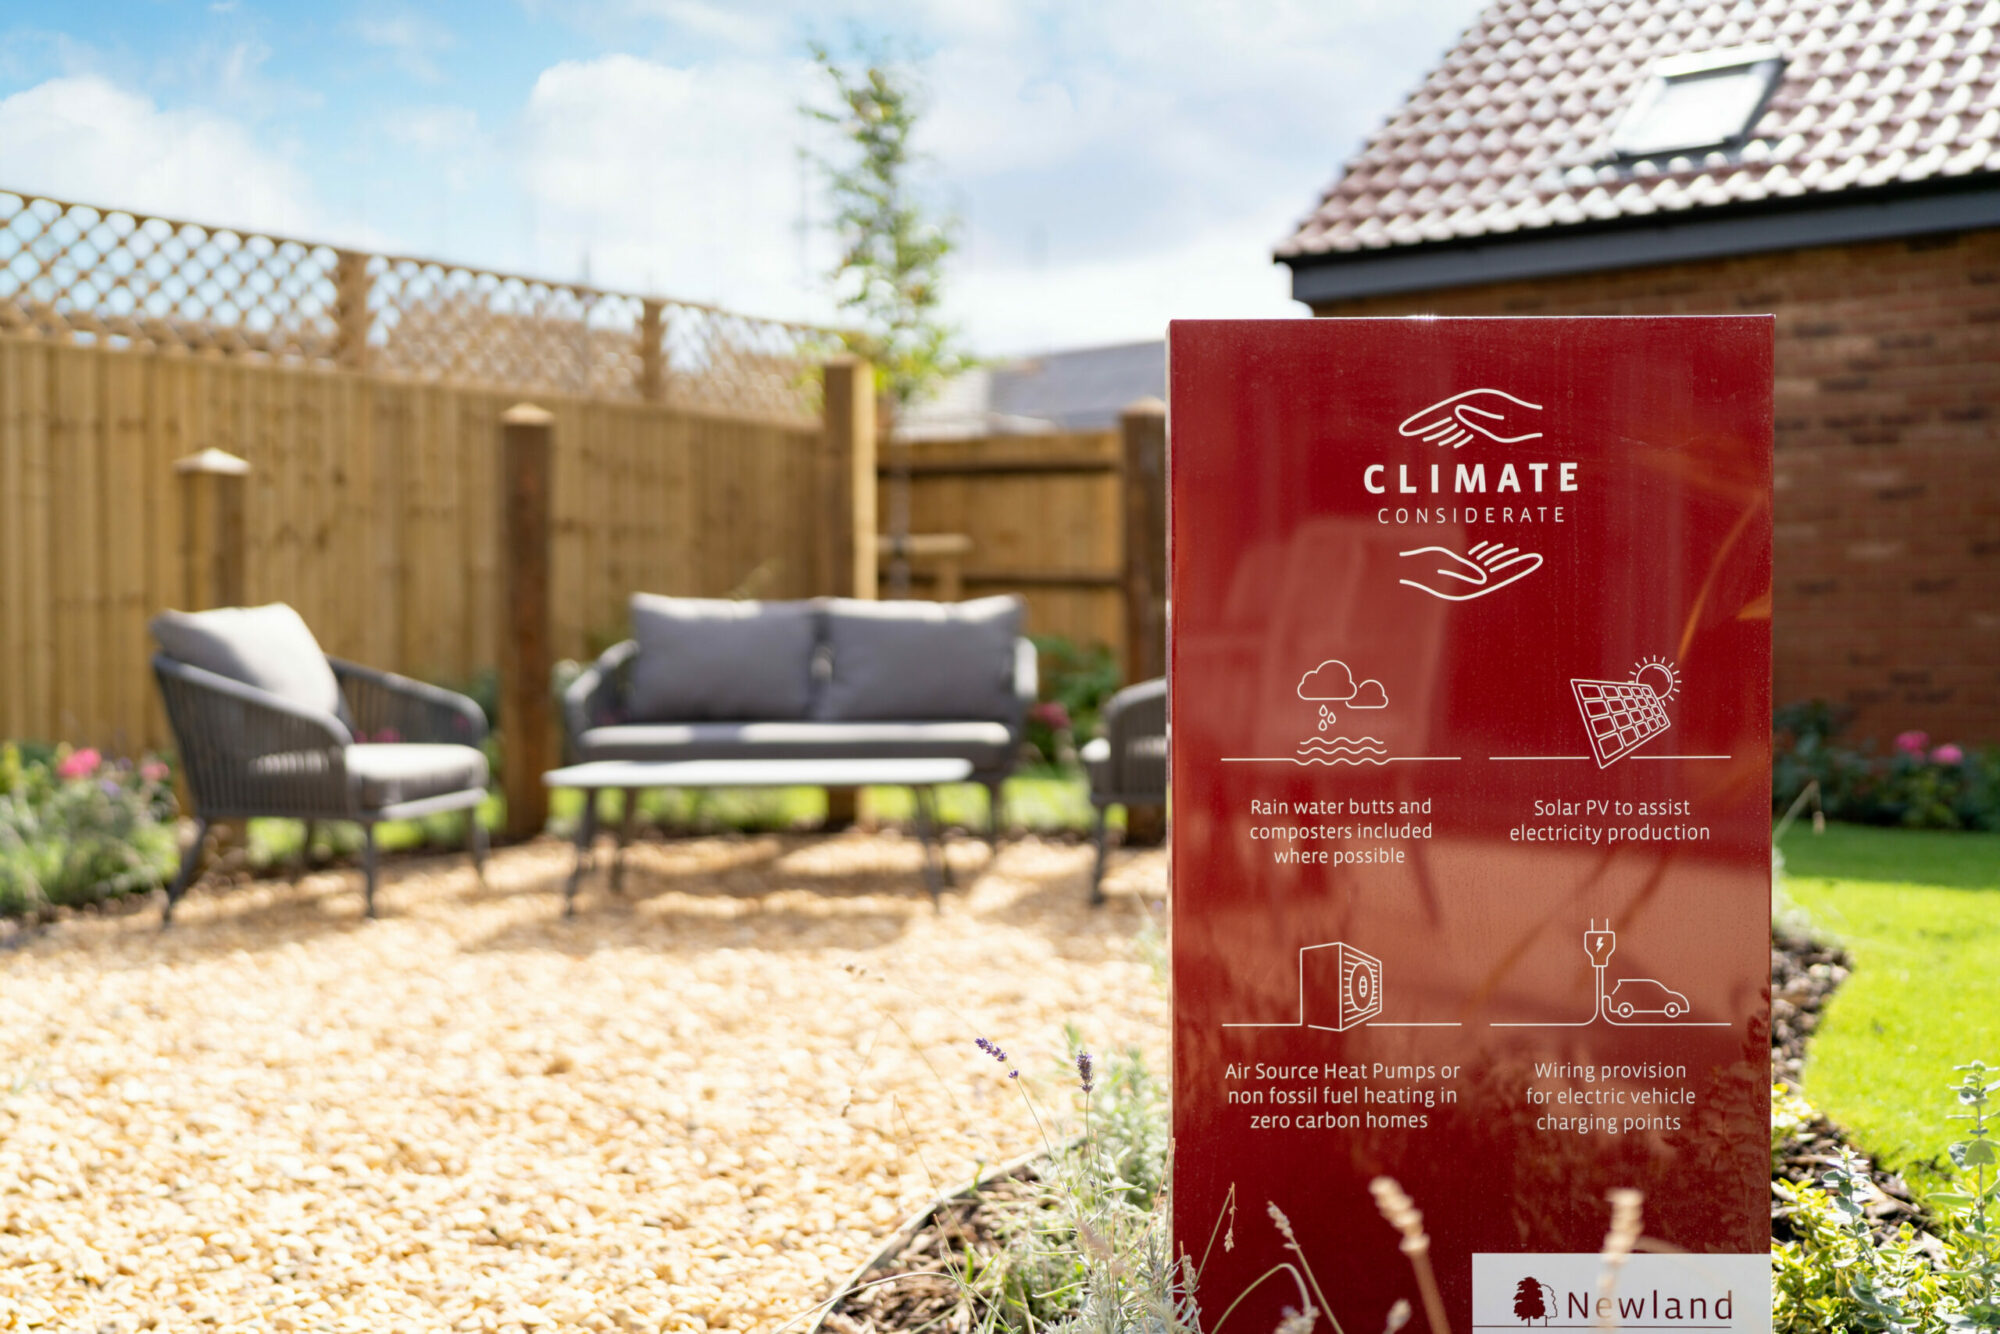 Our homes are full of climate considerate measures designed to live in harmony with the environment